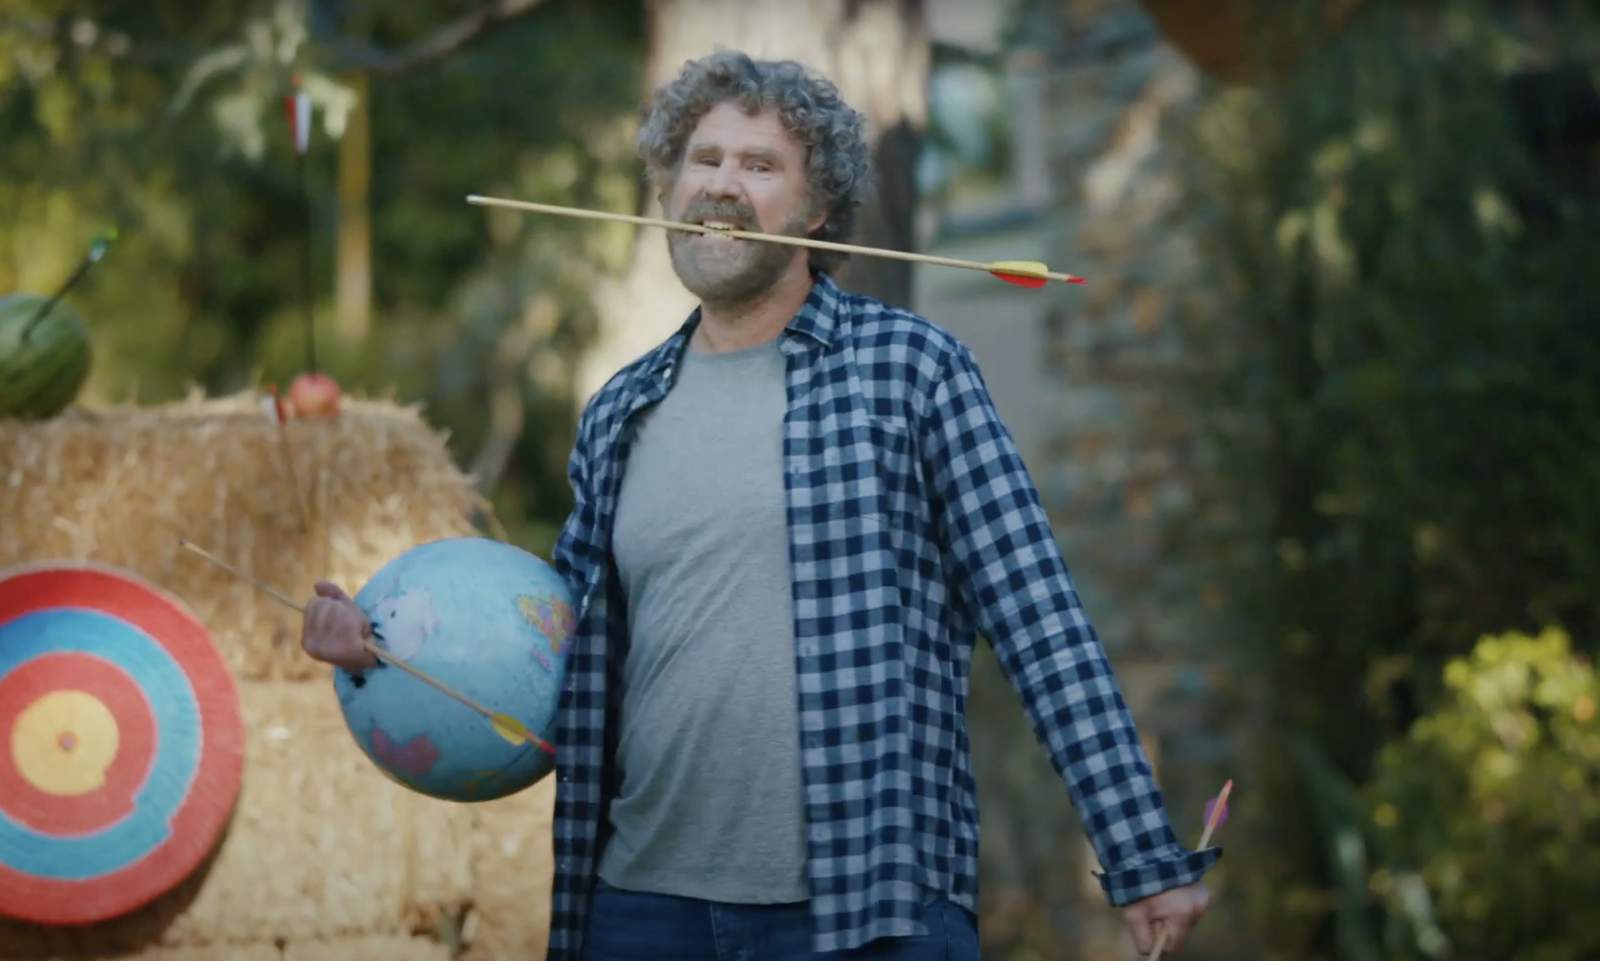 Watch GM’s hilarious Super Bowl commercial starring Will Ferrell